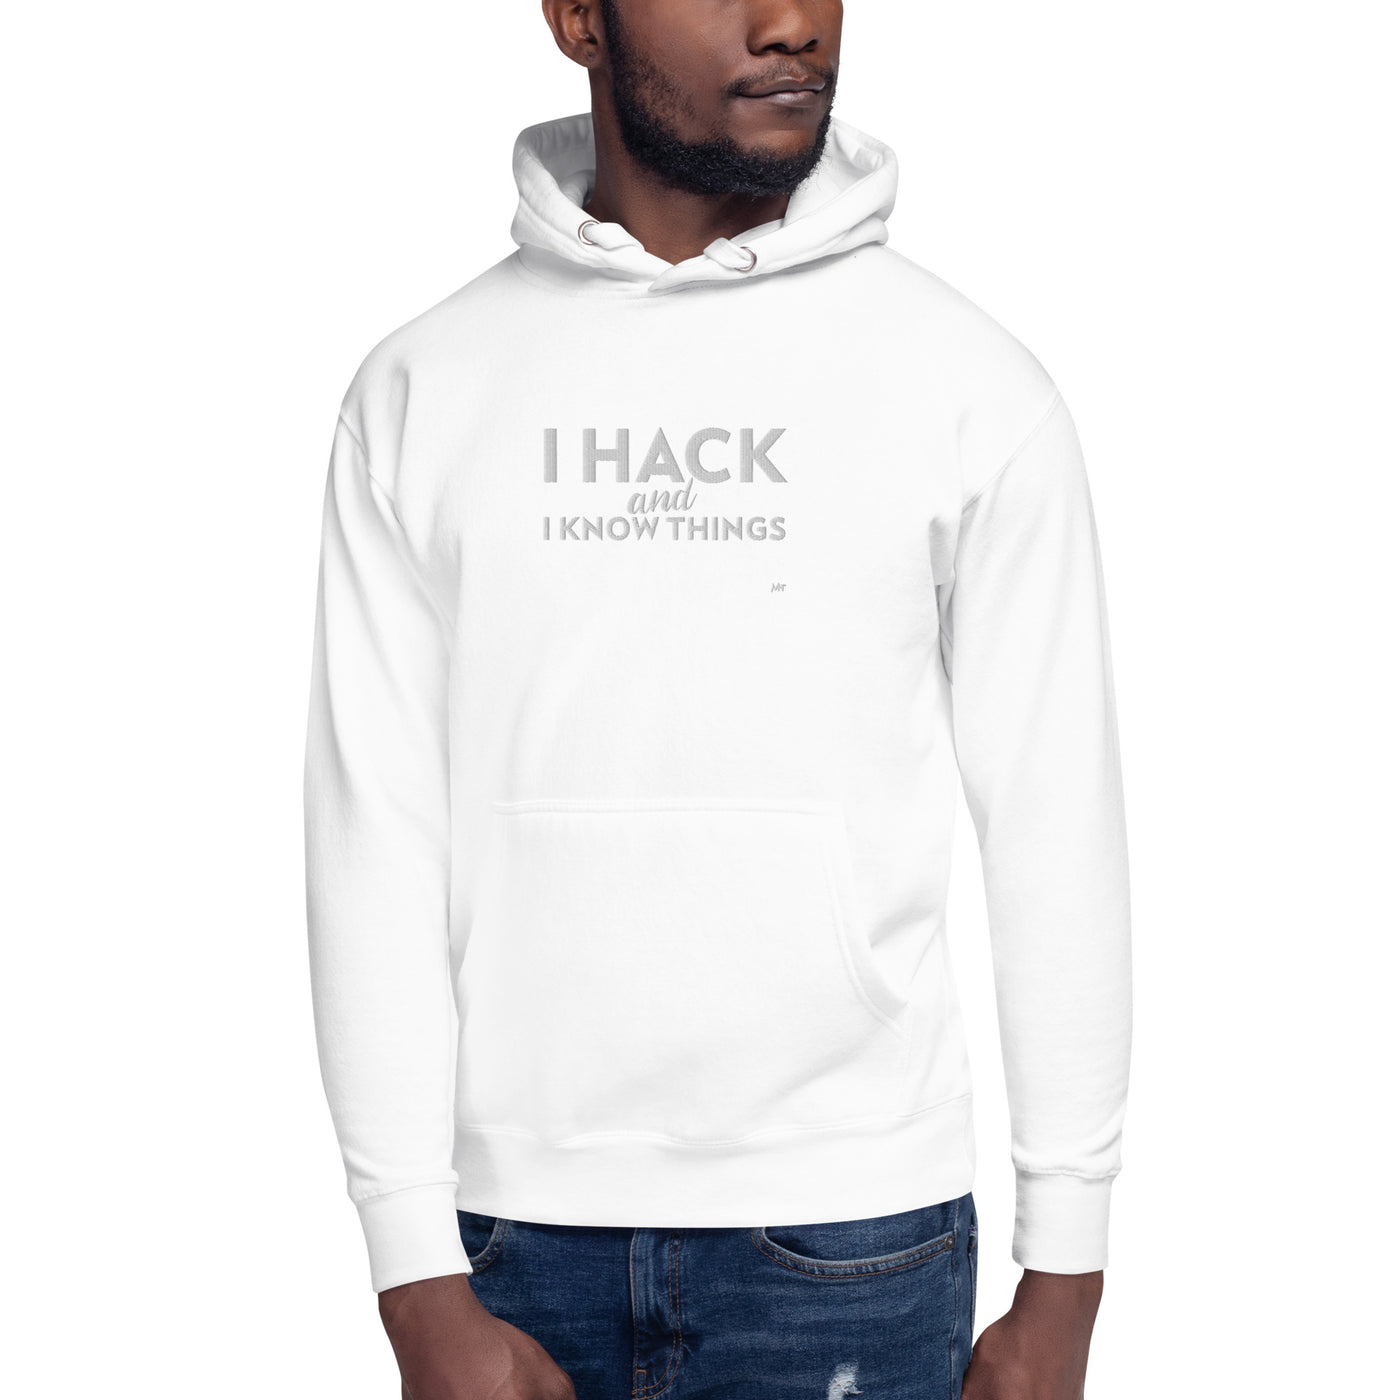 I hack and I know things - Unisex Hoodie (embroidered)